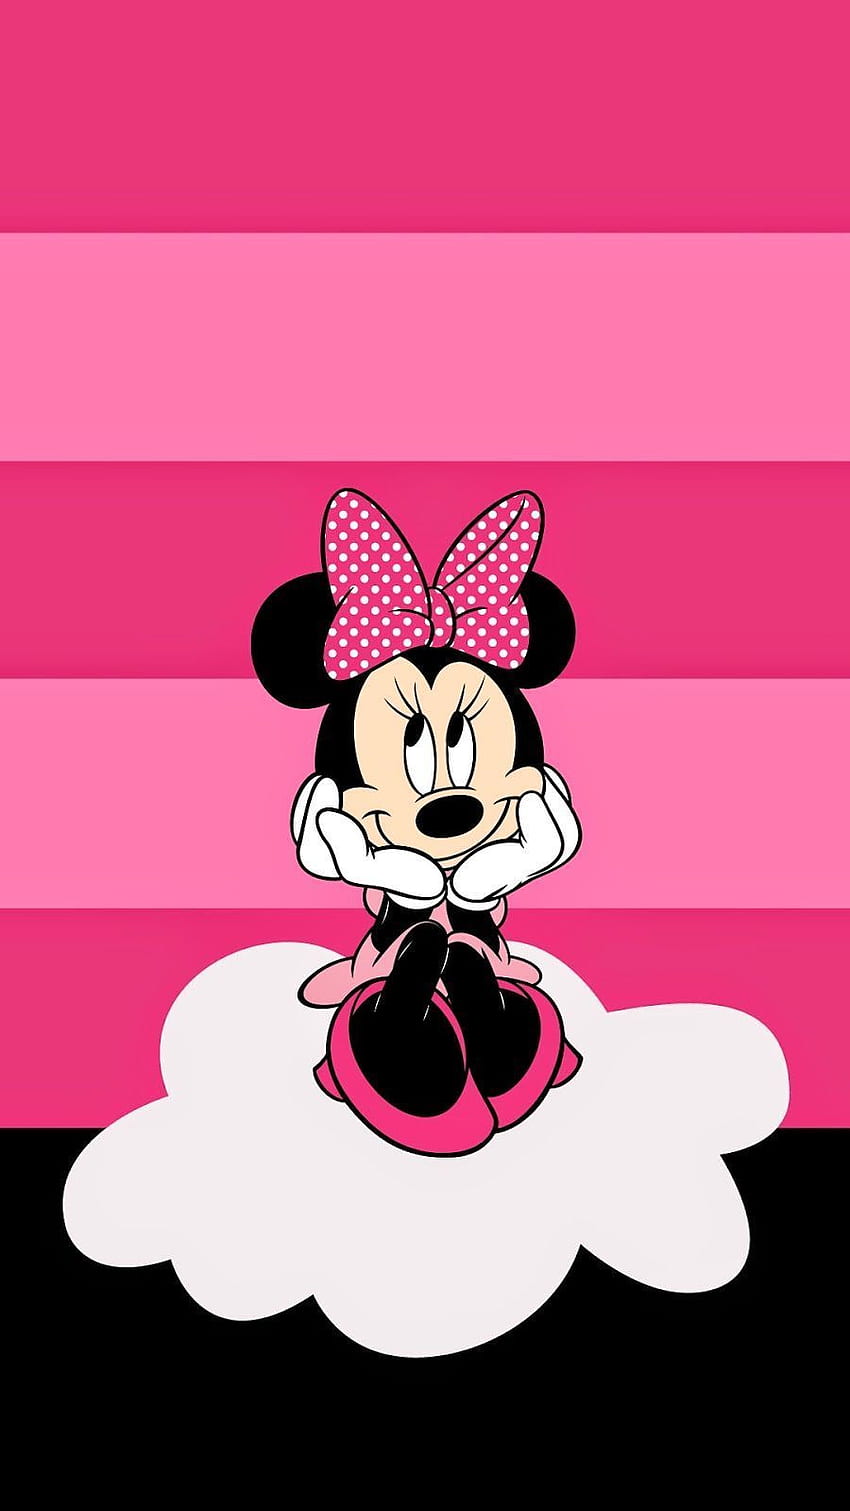 Pink Minnie Mouse - Top Pink Minnie Mouse Background - Minnie mouse , Mickey mouse , Minnie mouse background HD phone wallpaper